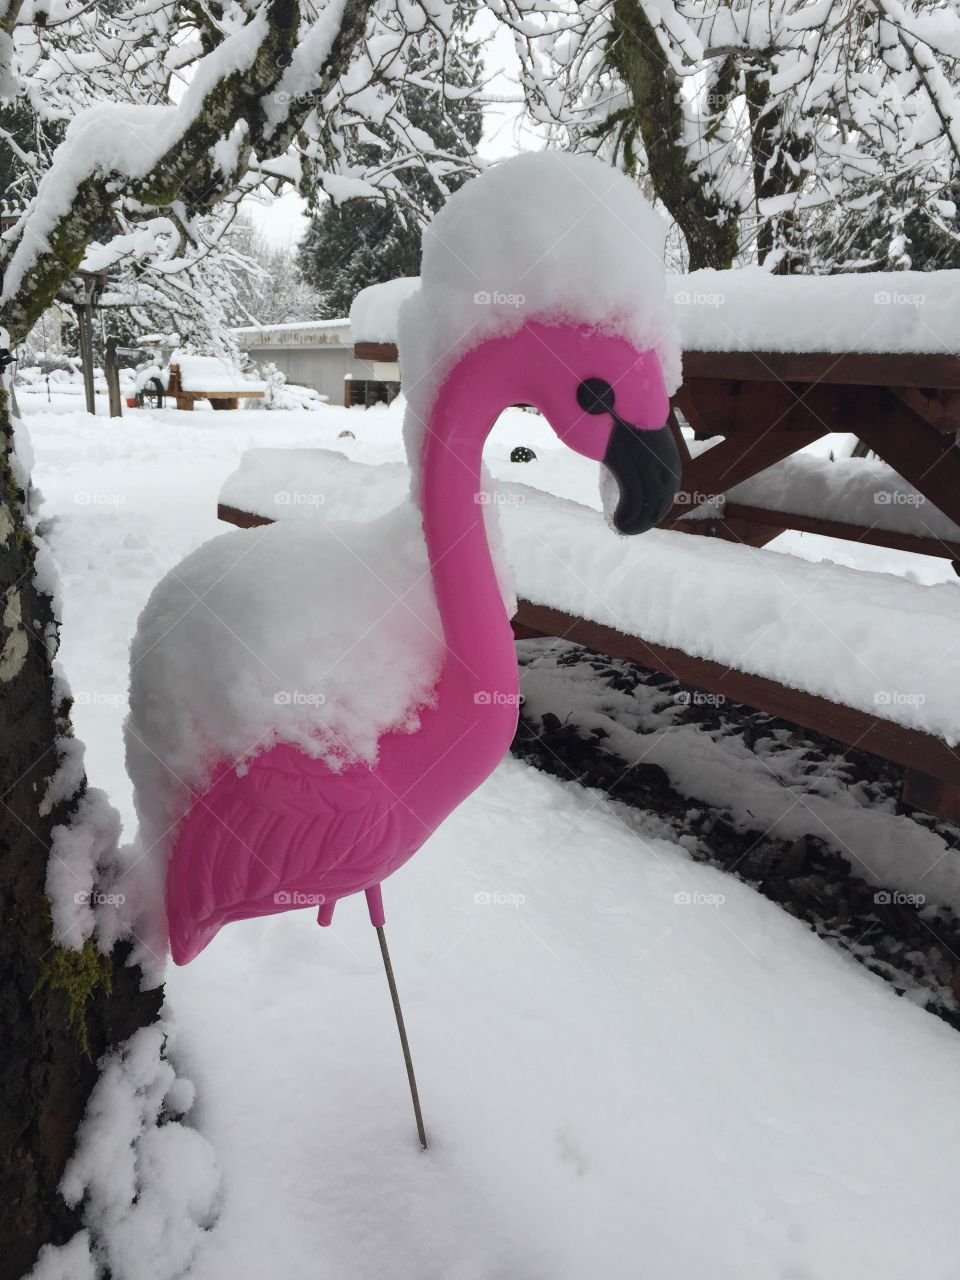 That's a cold flamingo!